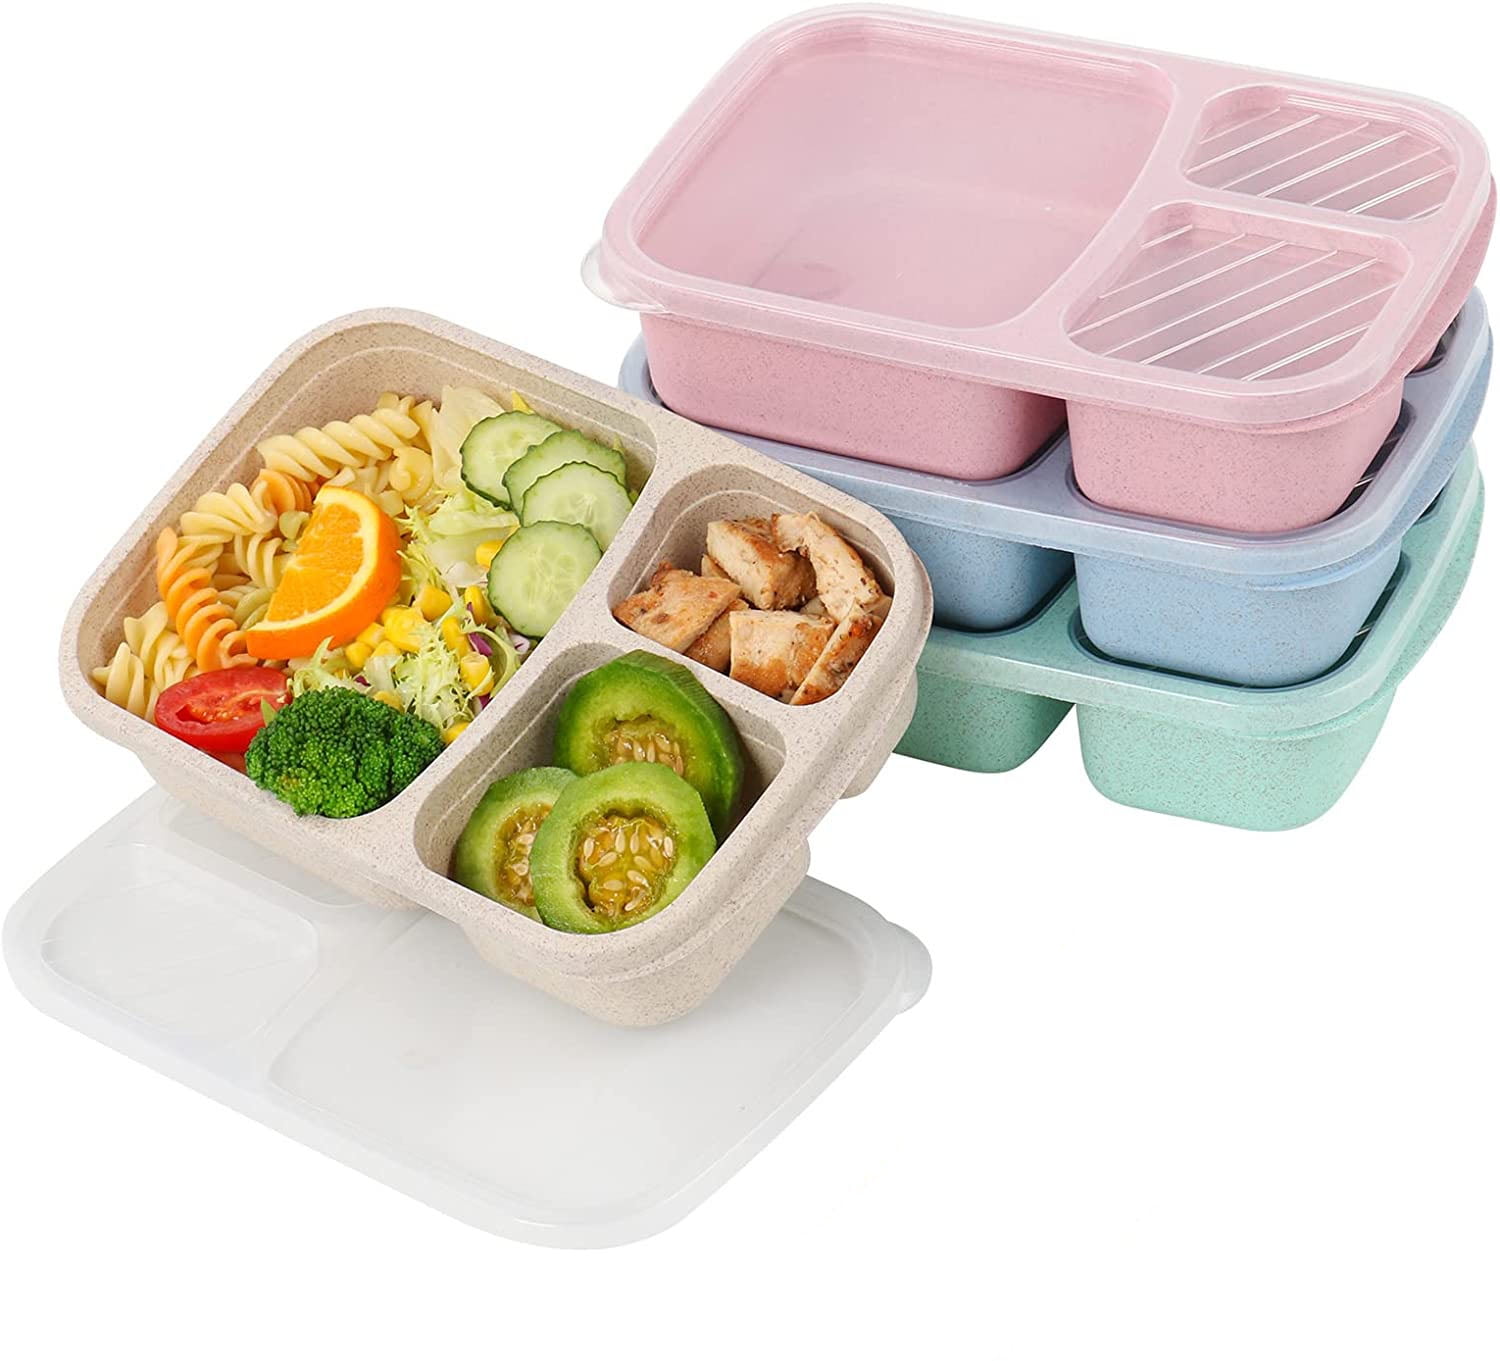 Luvan 3 Packs Large Glass Food Storage Containers with Lids 75oz+51oz +  35oz Lunch Meal Prep Containers Picnic Lunch Bento Boxes Storage with 4  Locking for Microwave Oven Freezer Dishwasher Safe Kitchen